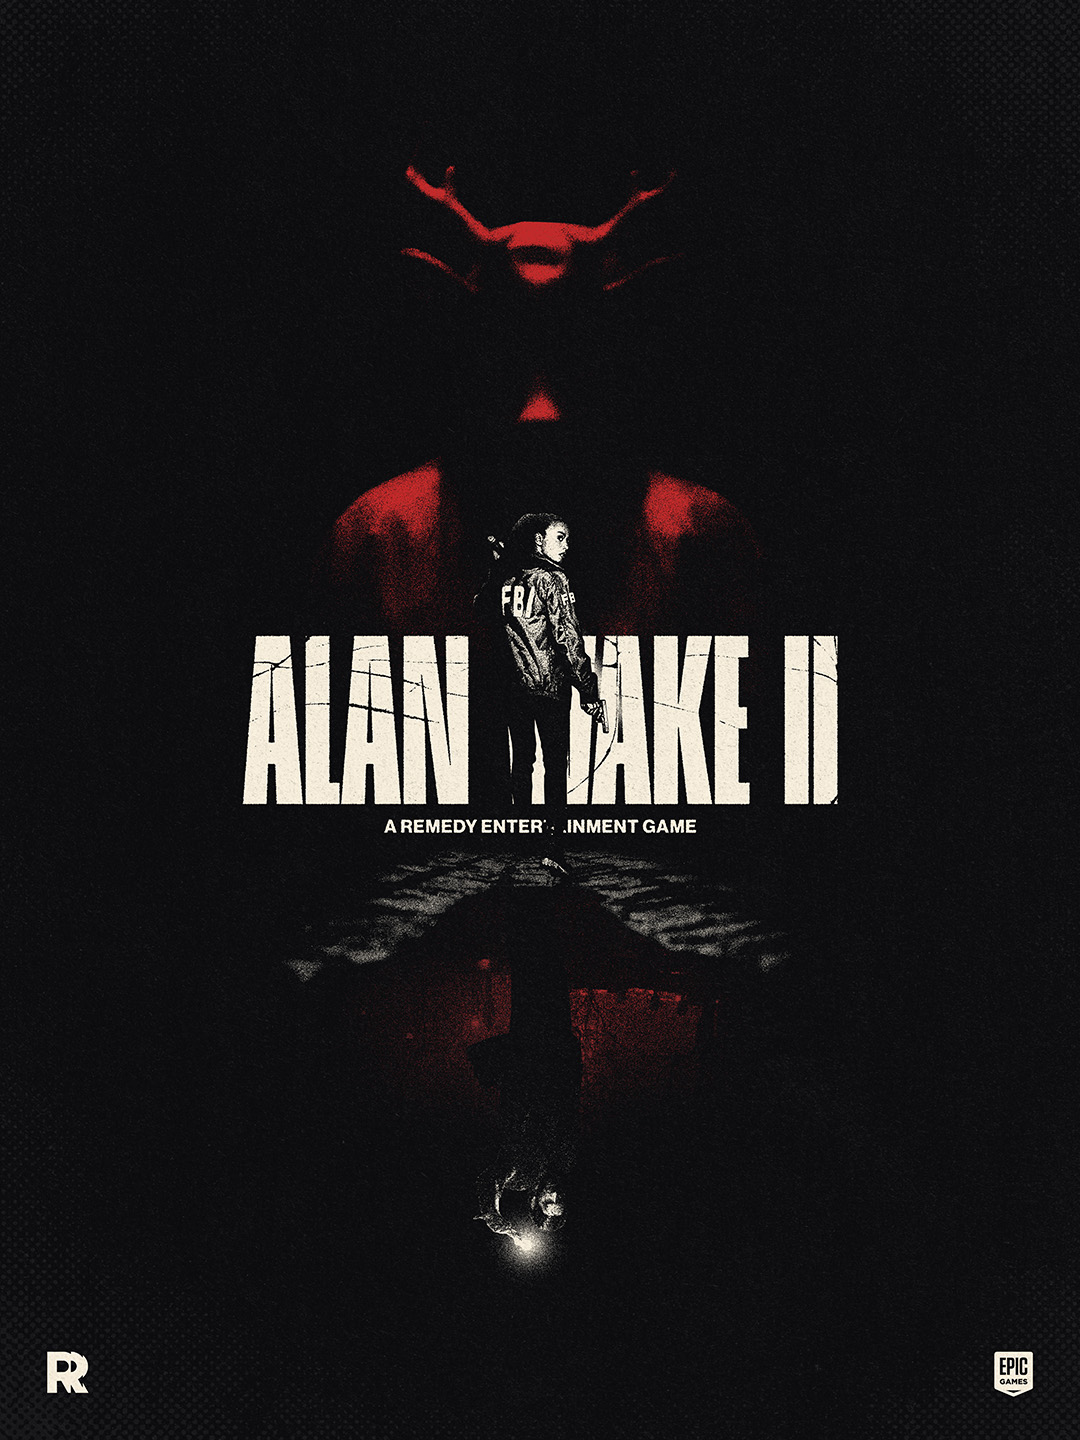 I added Alan Wake 2 to steam but tried to keep it as organic